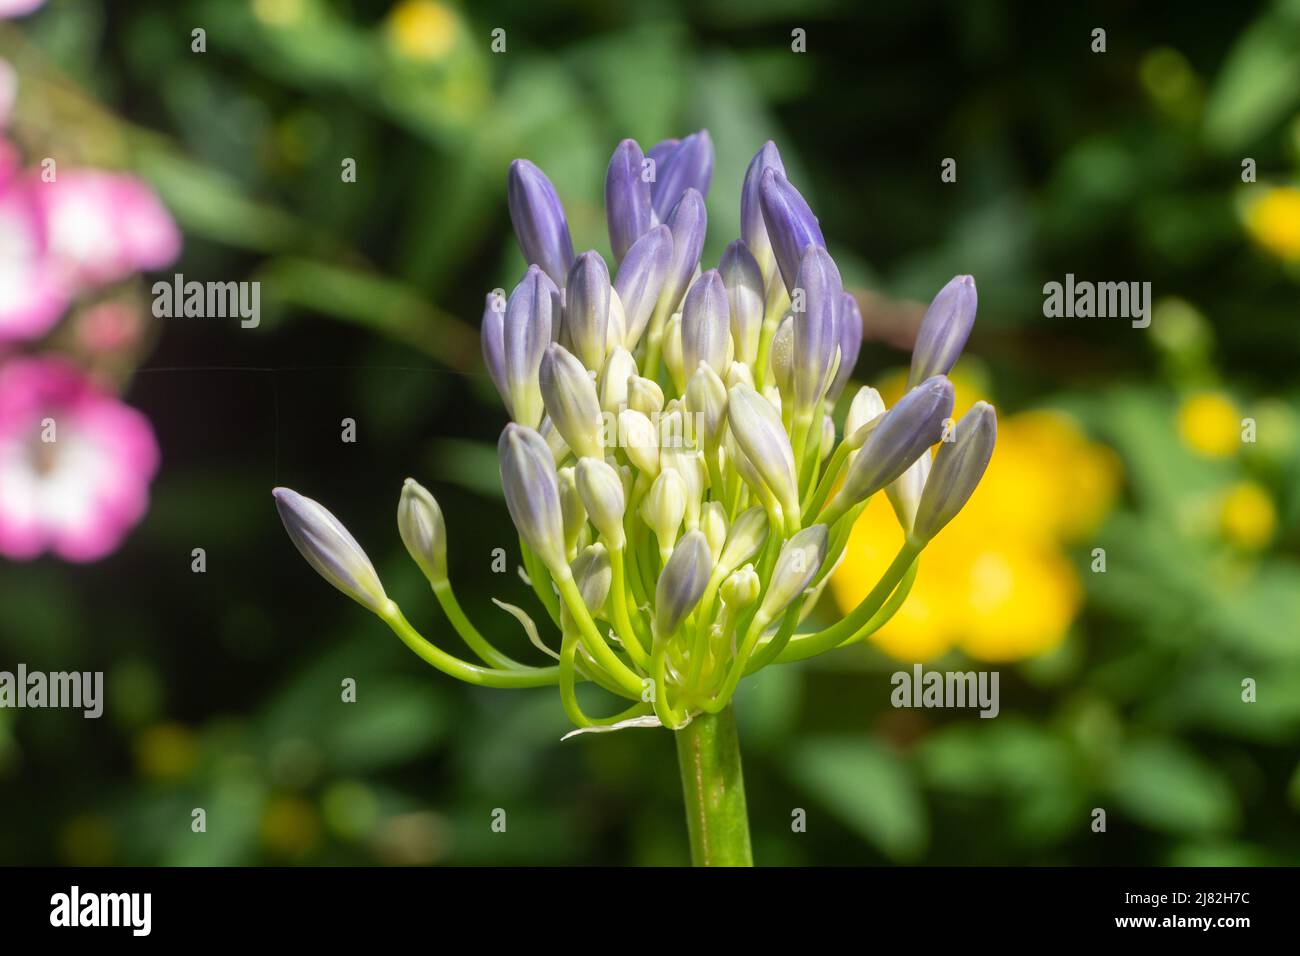 Agapanthus flower in a garden during summer Stock Photo